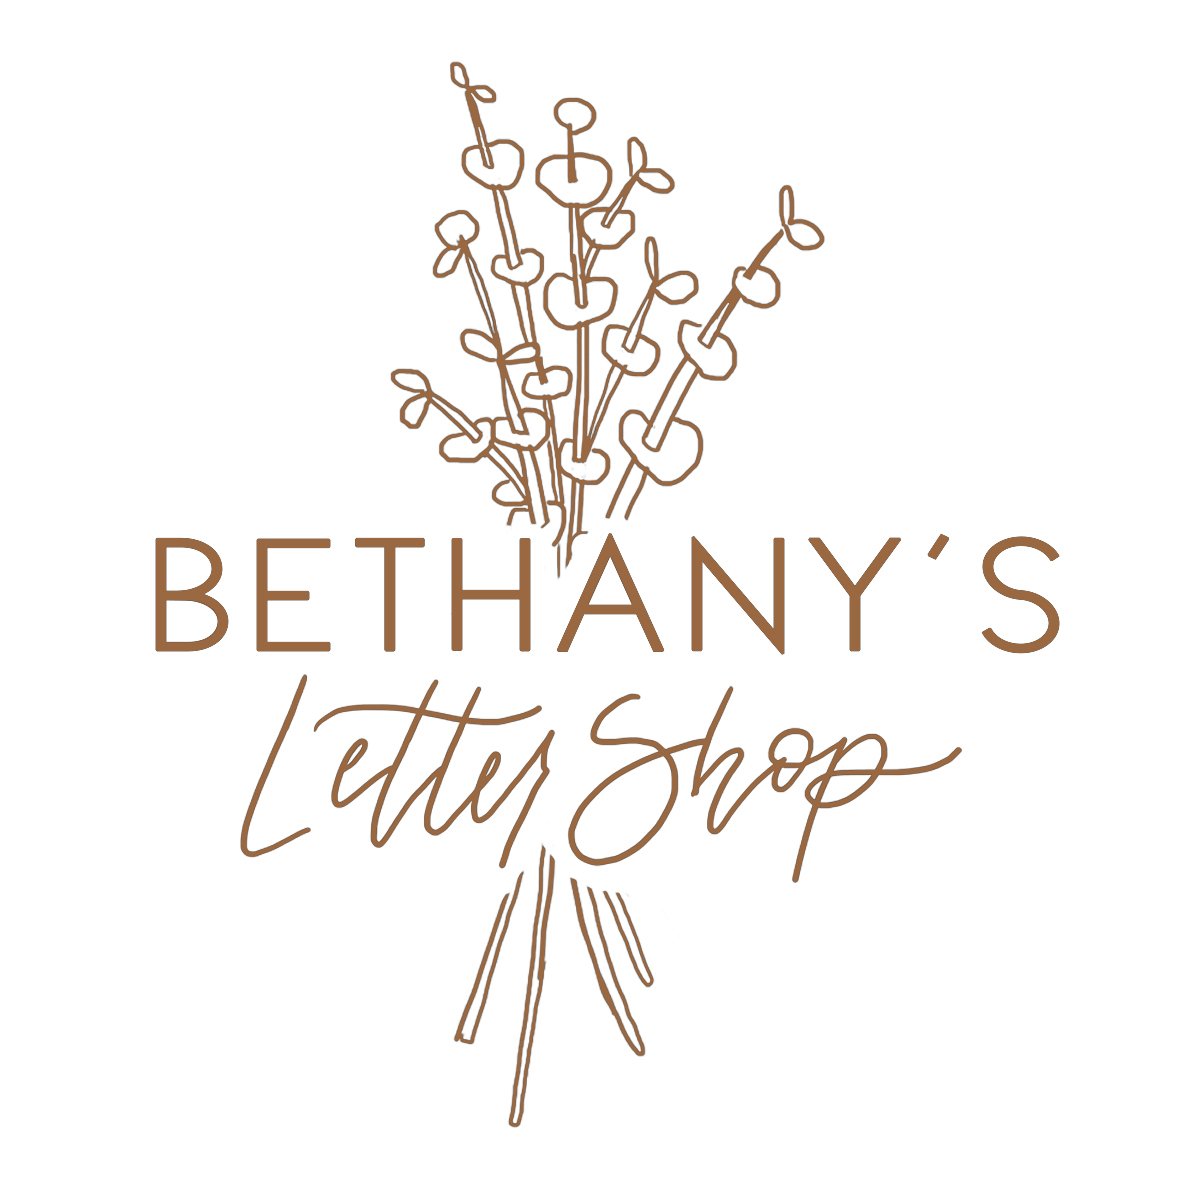 Bethany's Letter Shop